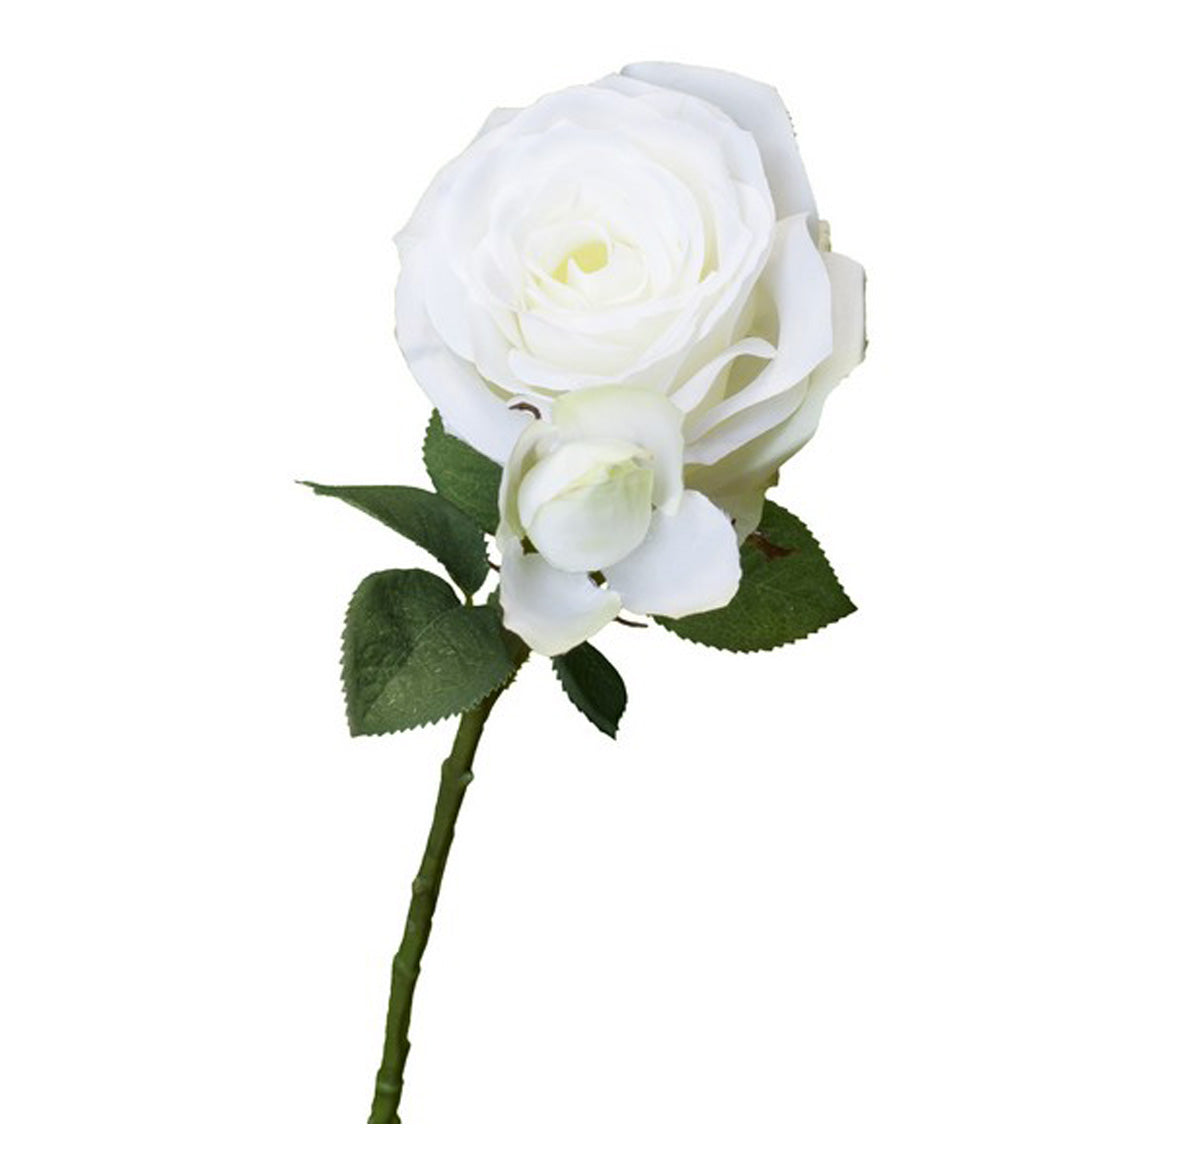 Artificial White Rose Spray With Bud - Set of 4 | Silk Flowers | Home Decor